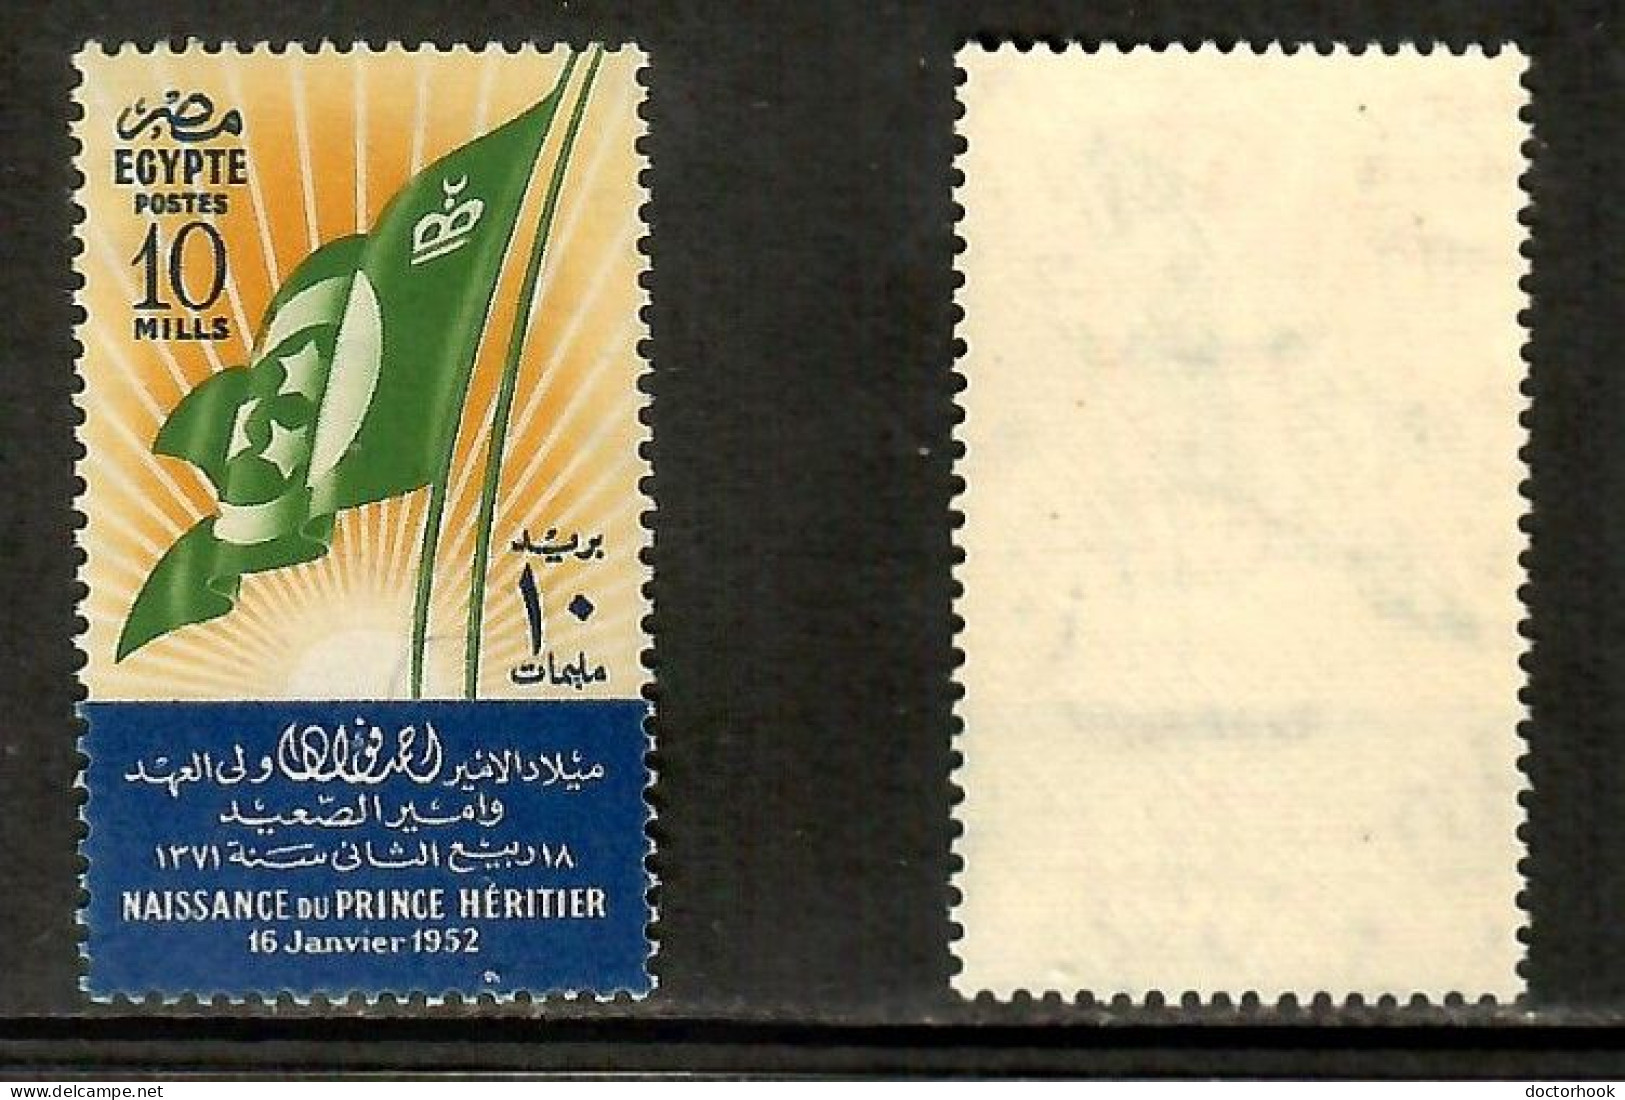 EGYPT    Scott # 317** MINT NH (CONDITION PER SCAN) (Stamp Scan # 1038-6) - Nuovi